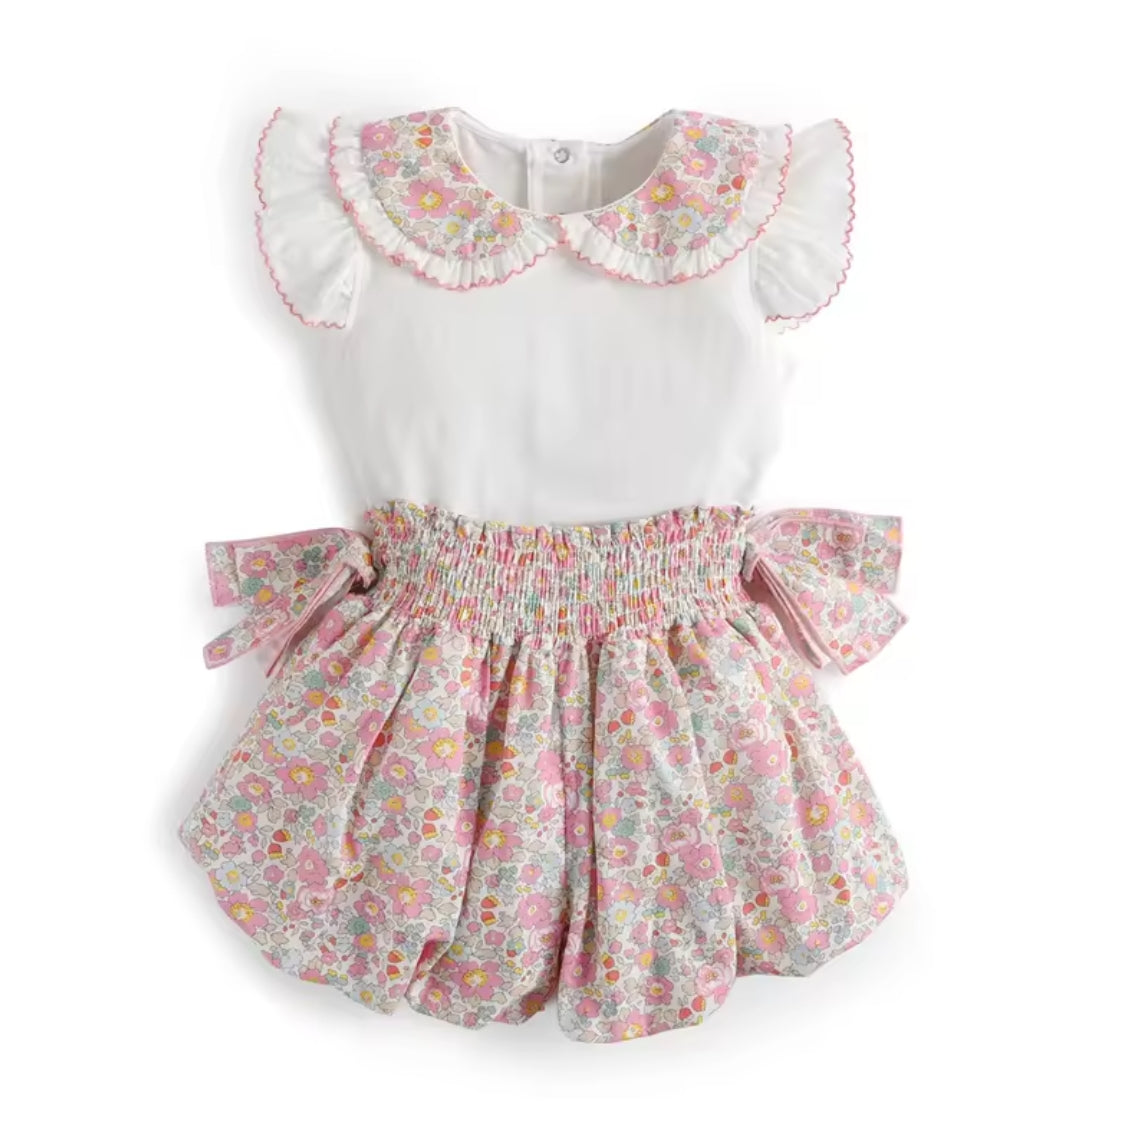 Top with Floral Panty Shorts Suit Baby Girls Clothes Set